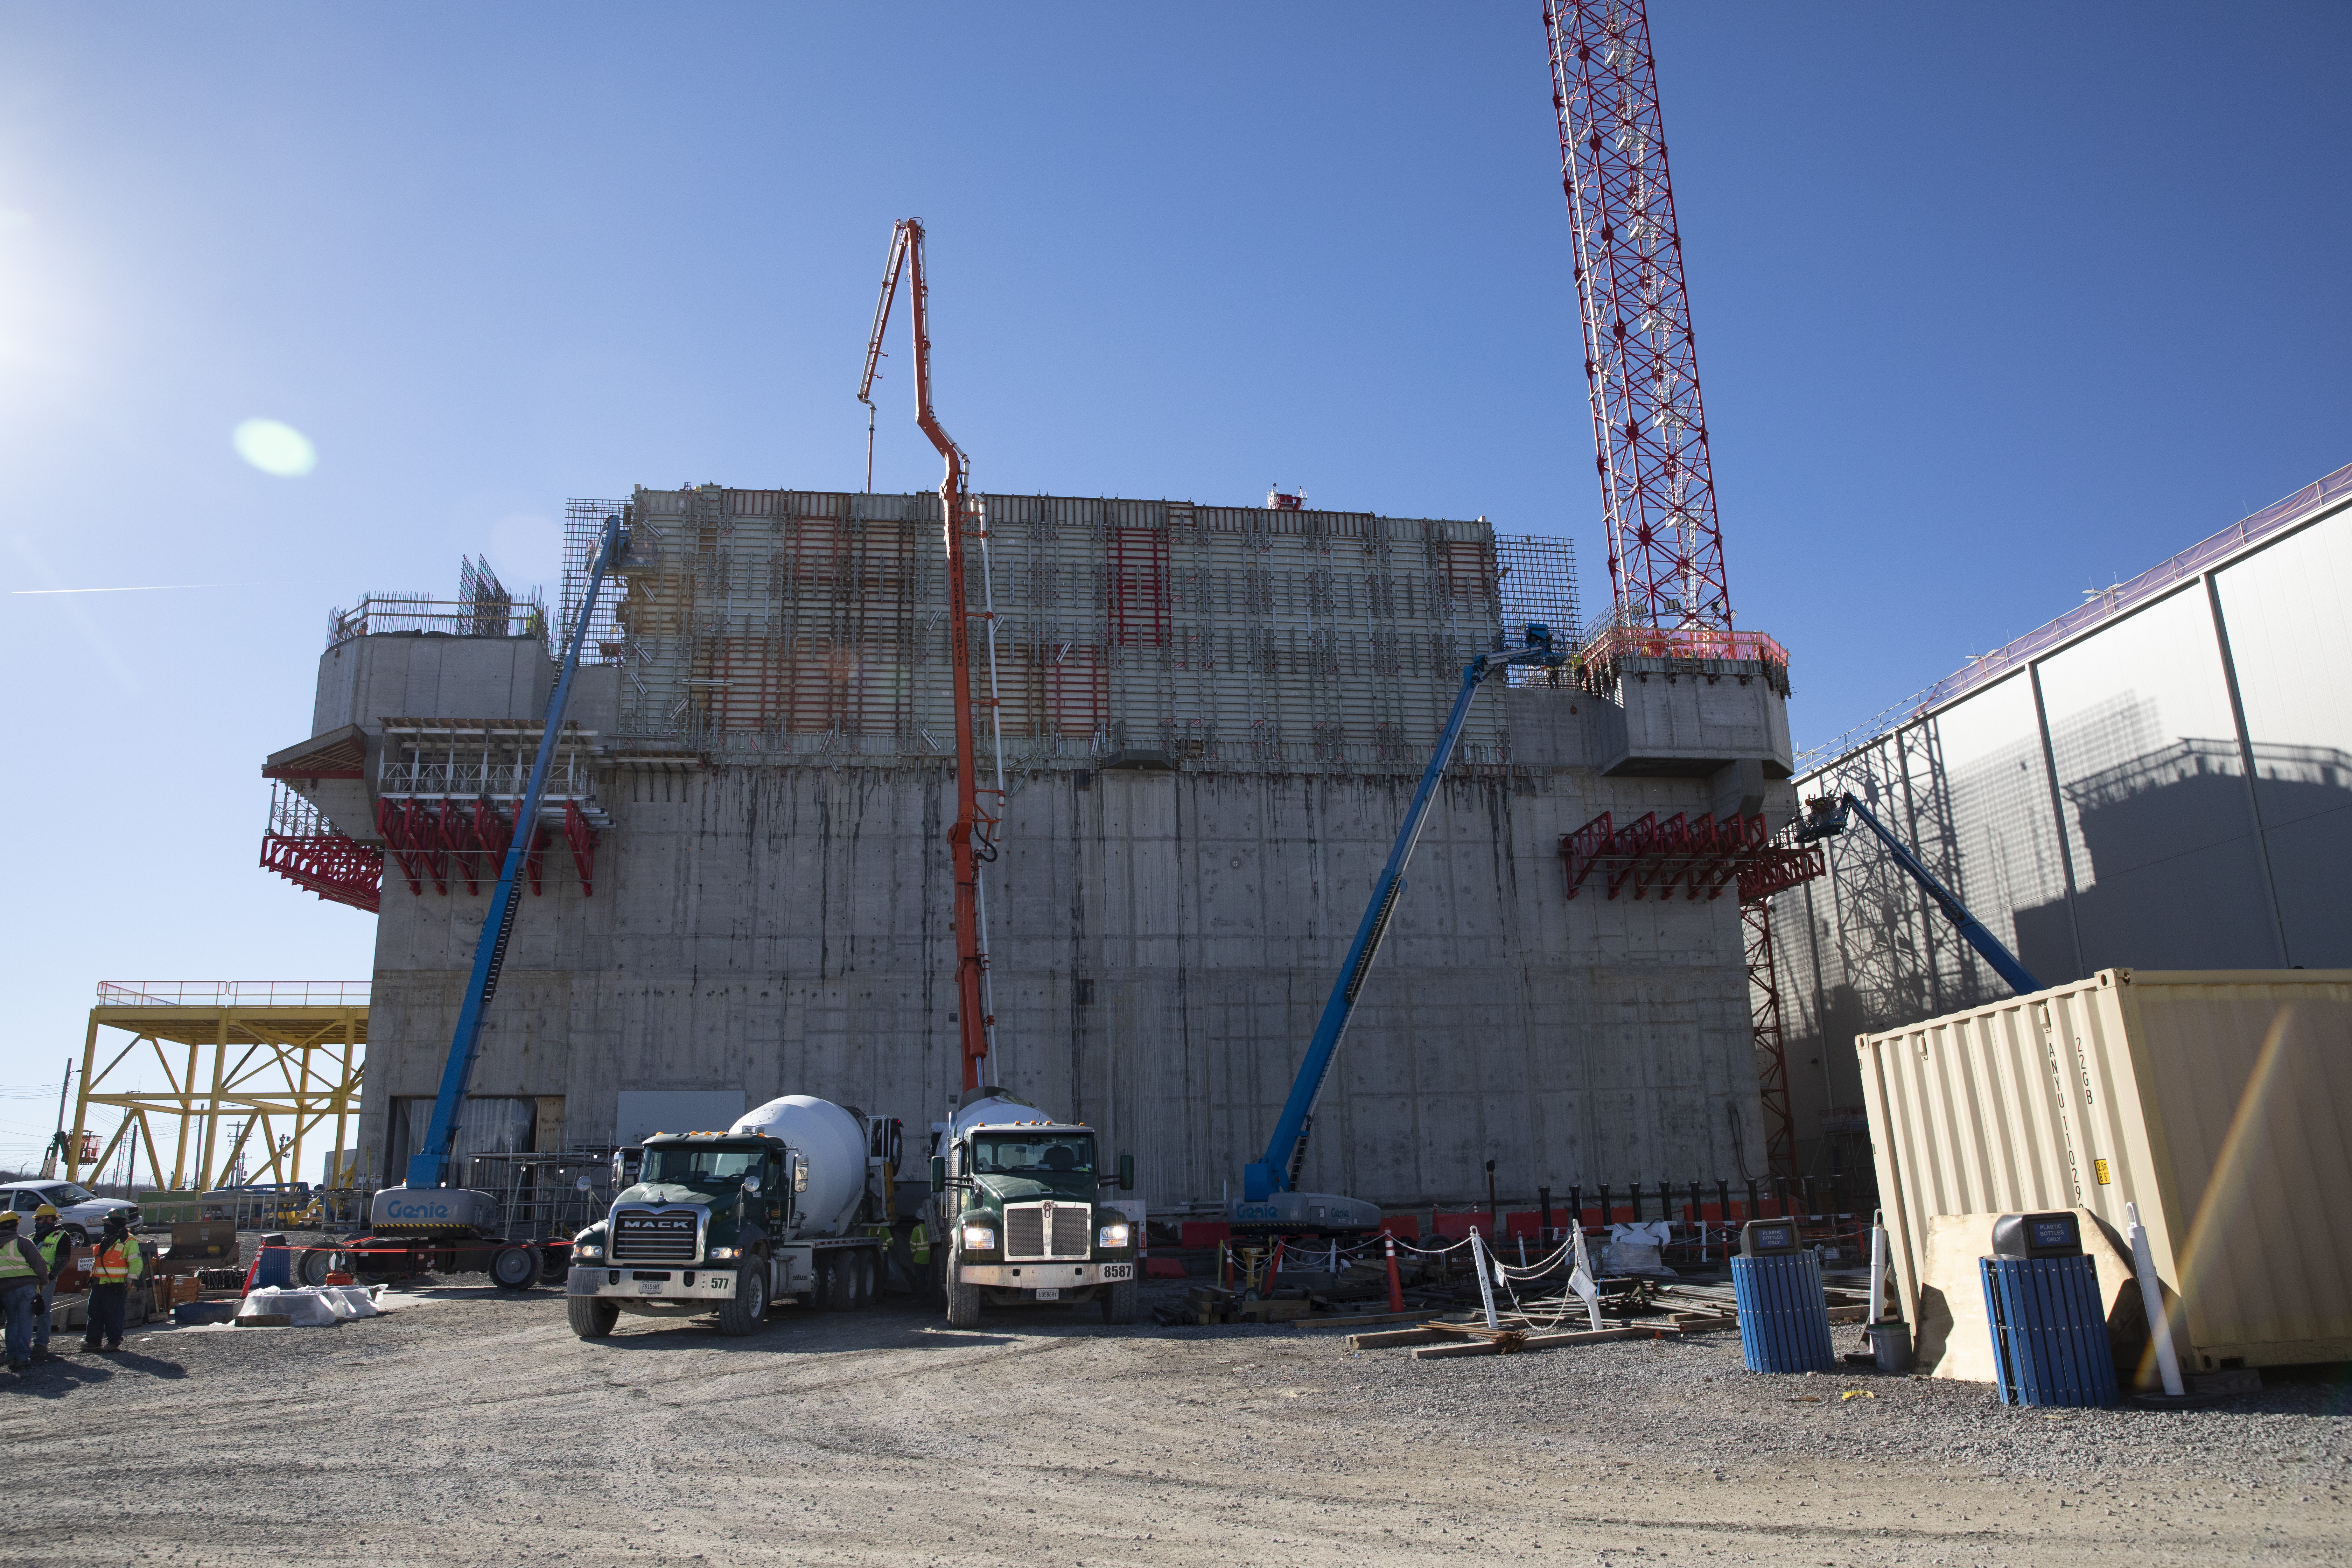 Crews at the Main Process Building pour concrete to complete it’s first wall placement for the third level.